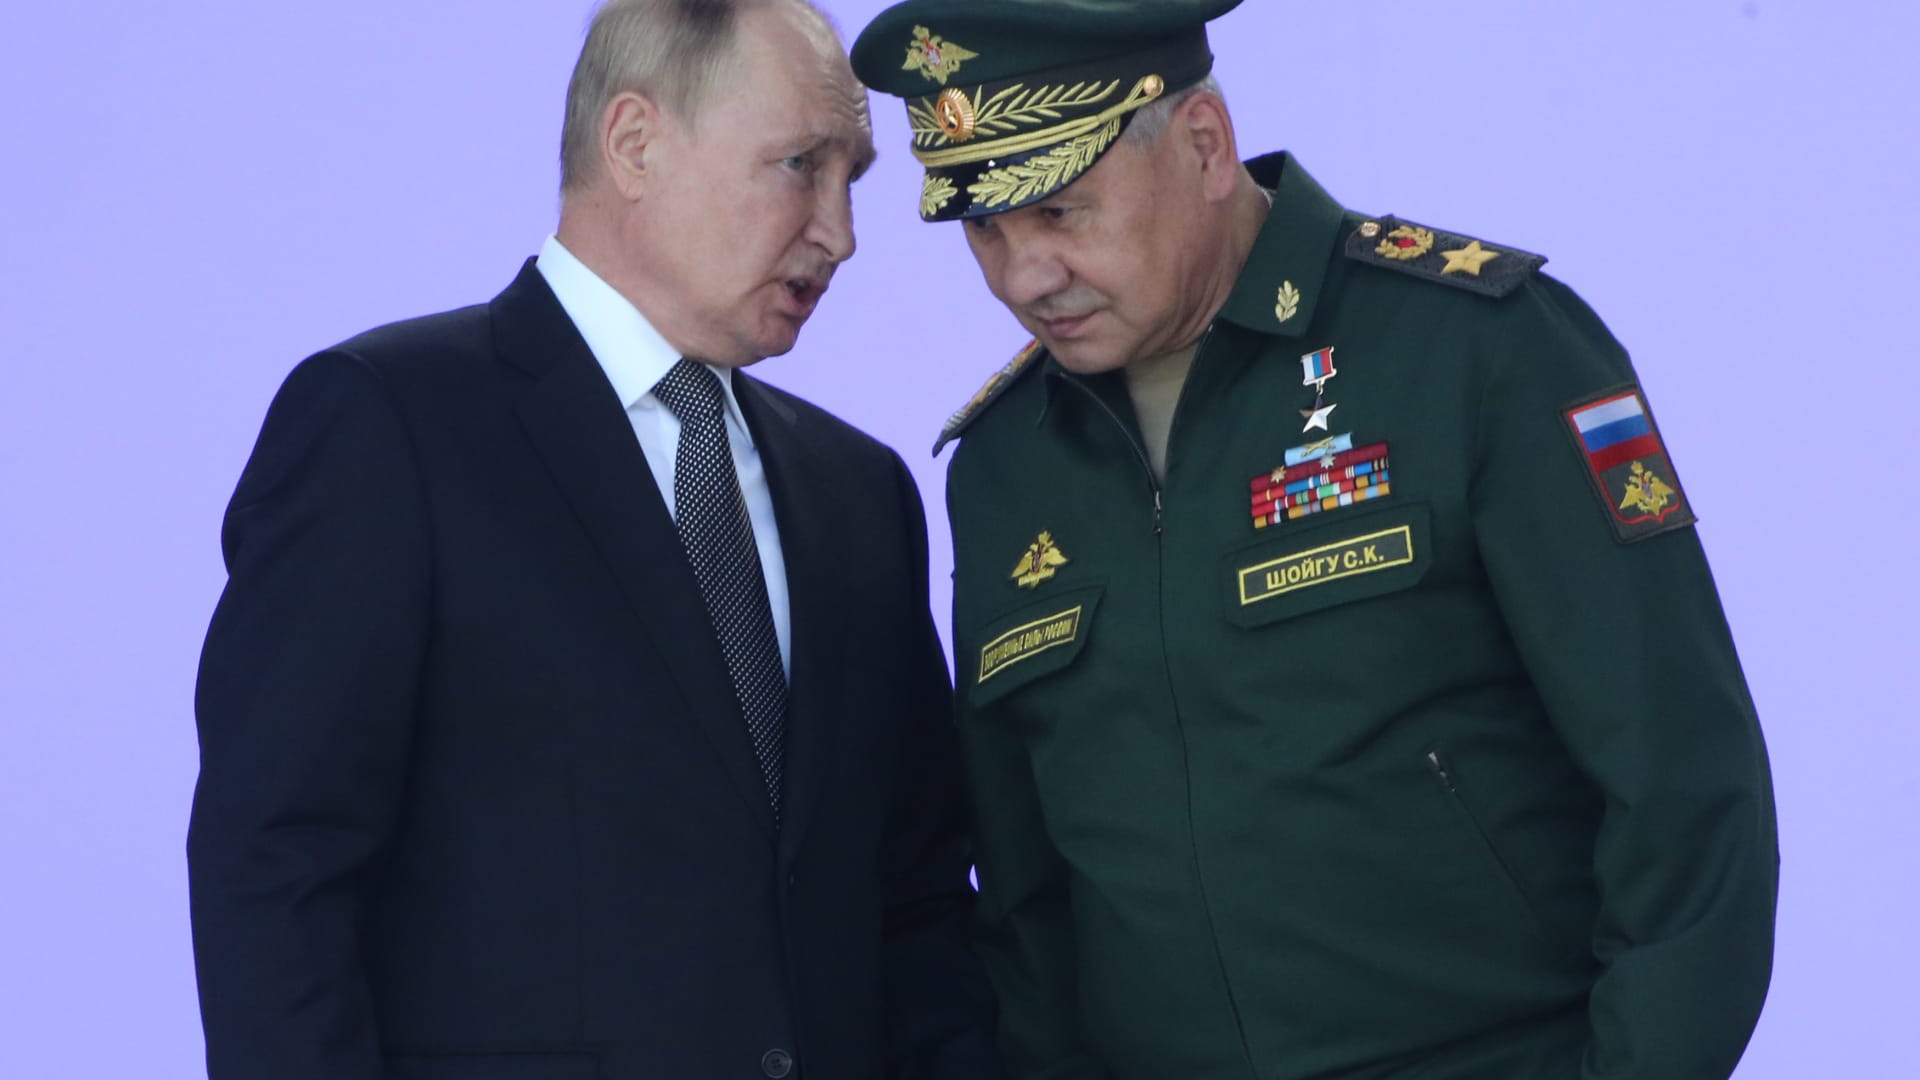 Russian President Vladimir Putin (L) talks to Defence Minister Sergei Shoigu (R) during the opening ceremony of the International Military Technical Forum 'Army 2022', on August 15, 2022, in Kubinka, outside of Moscow, Russia.